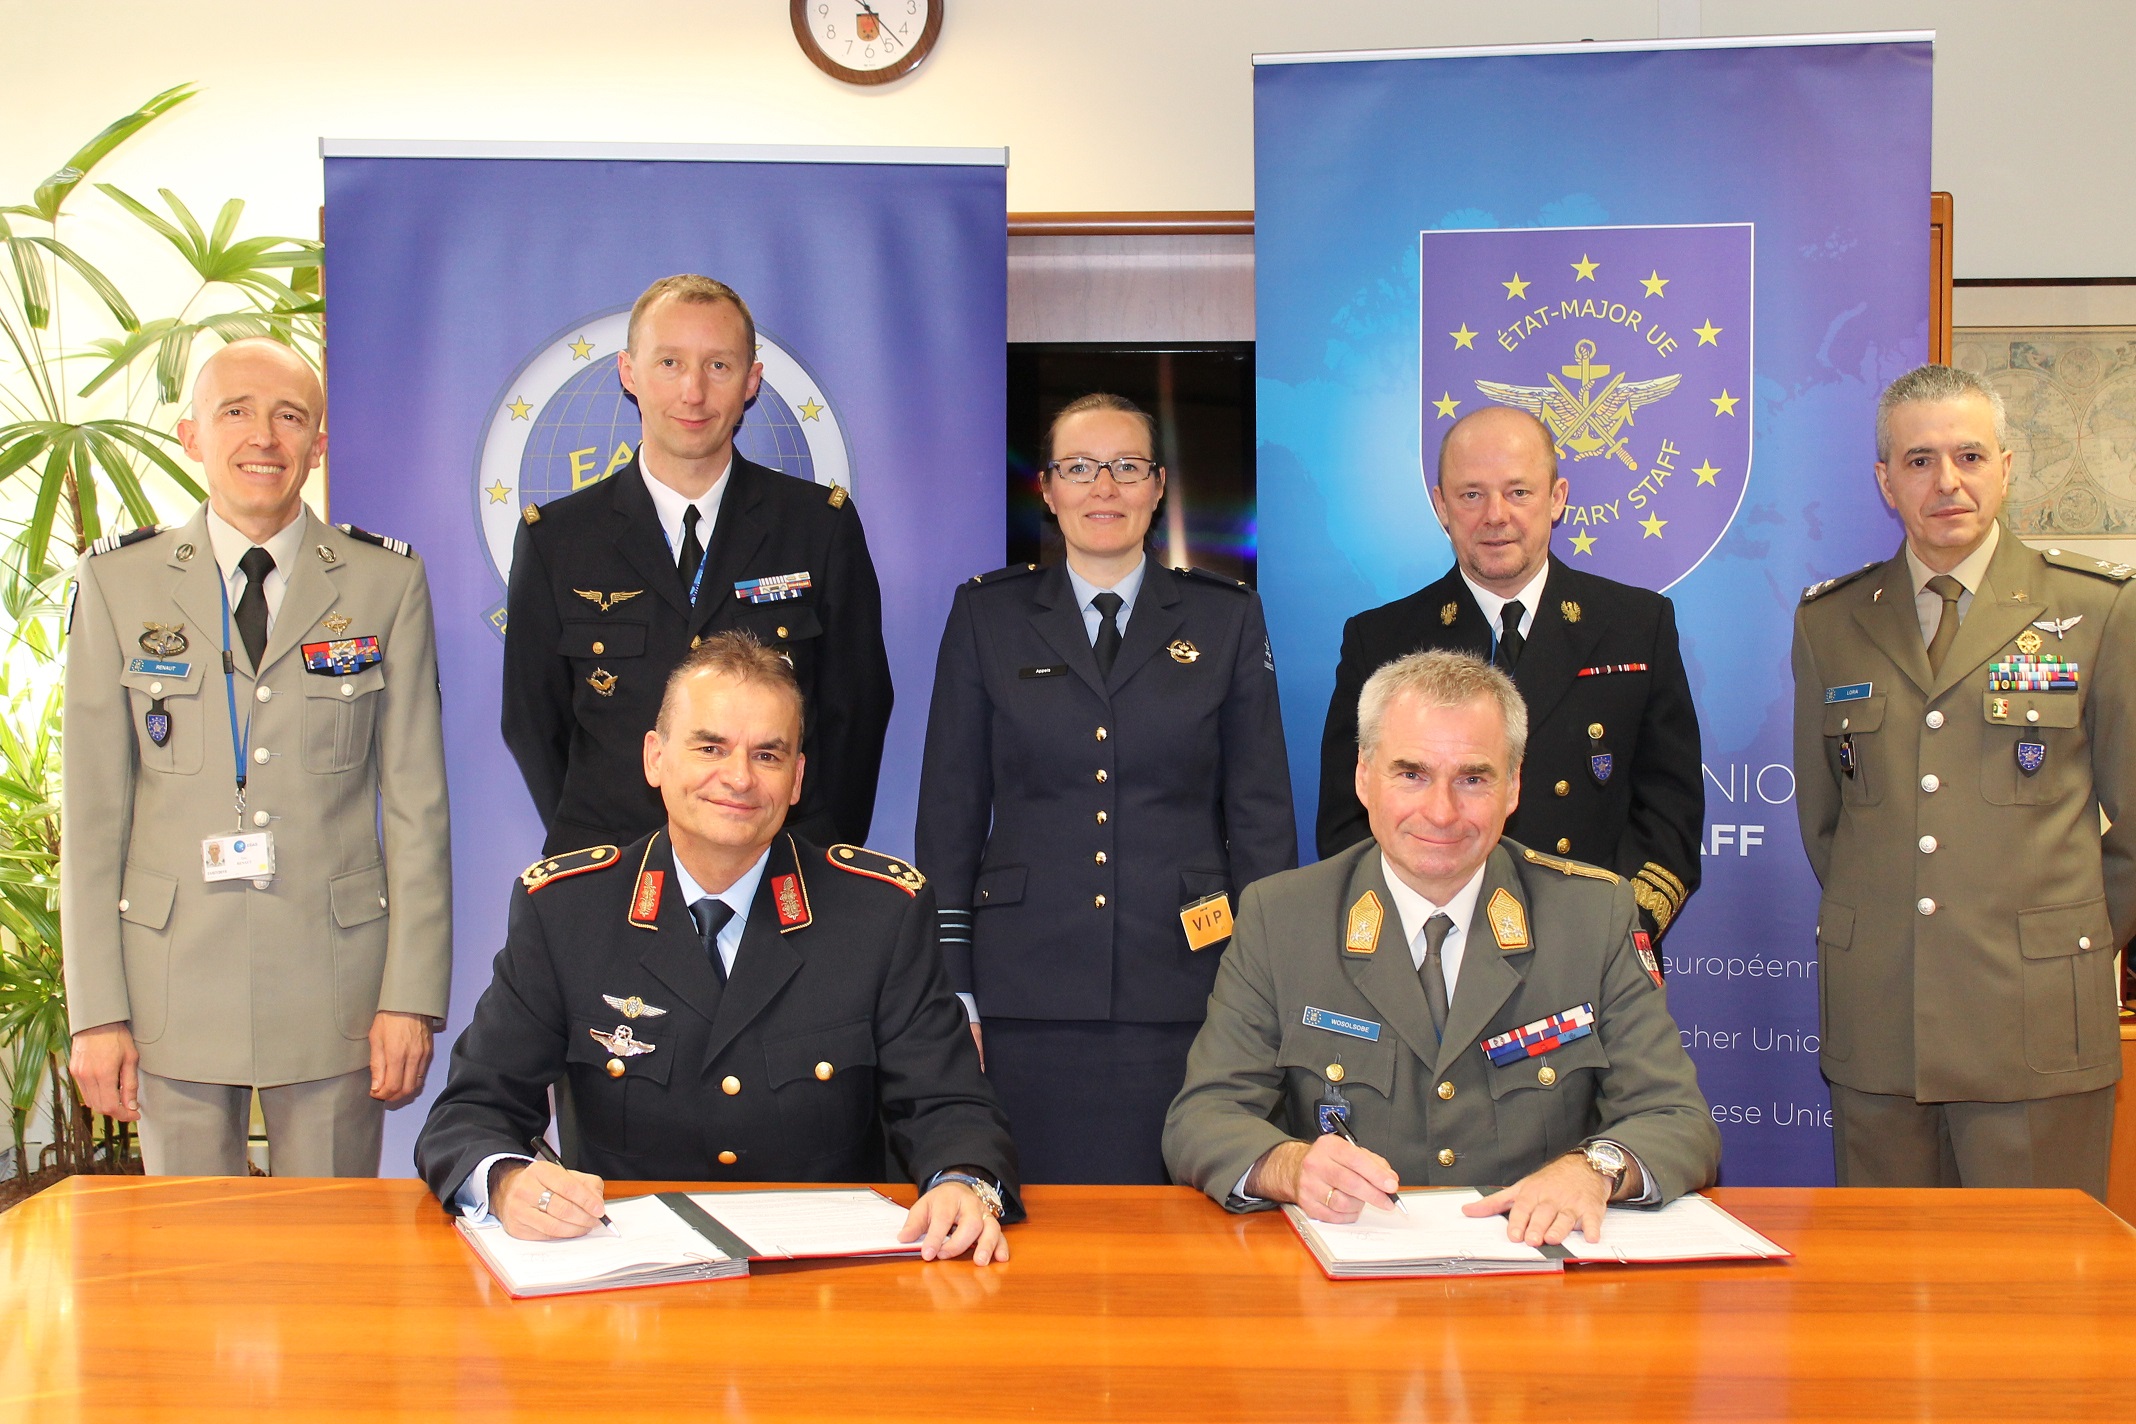 EATC and EUMS are strengthening their cooperation